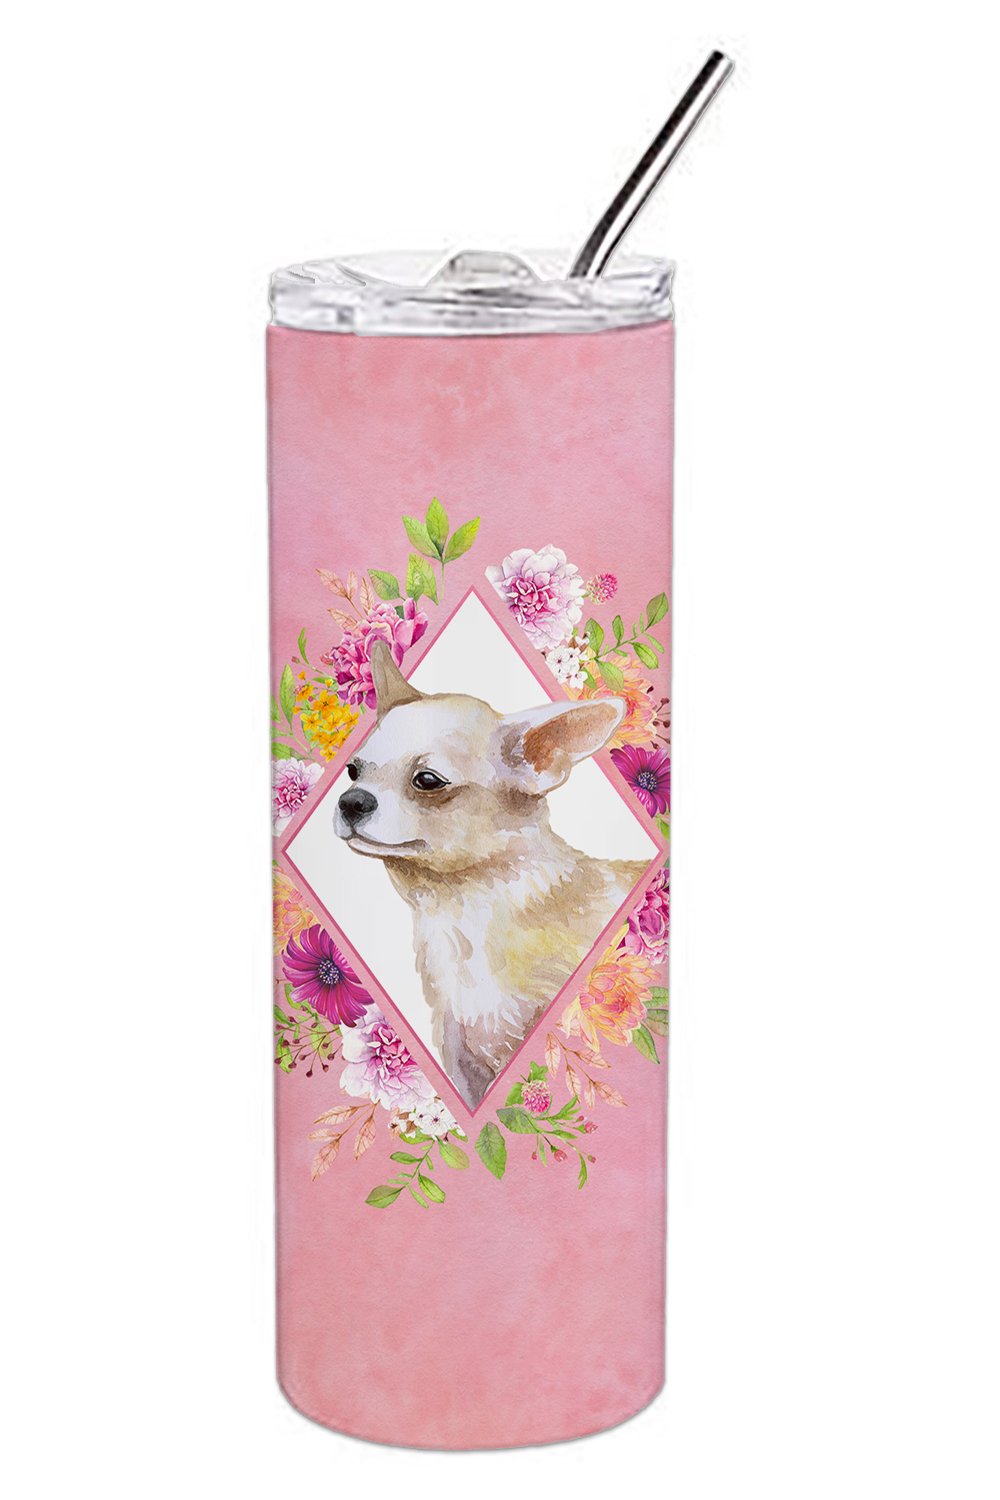 Chihuahua #2 Pink Flowers Double Walled Stainless Steel 20 oz Skinny Tumbler CK4129TBL20 by Caroline's Treasures